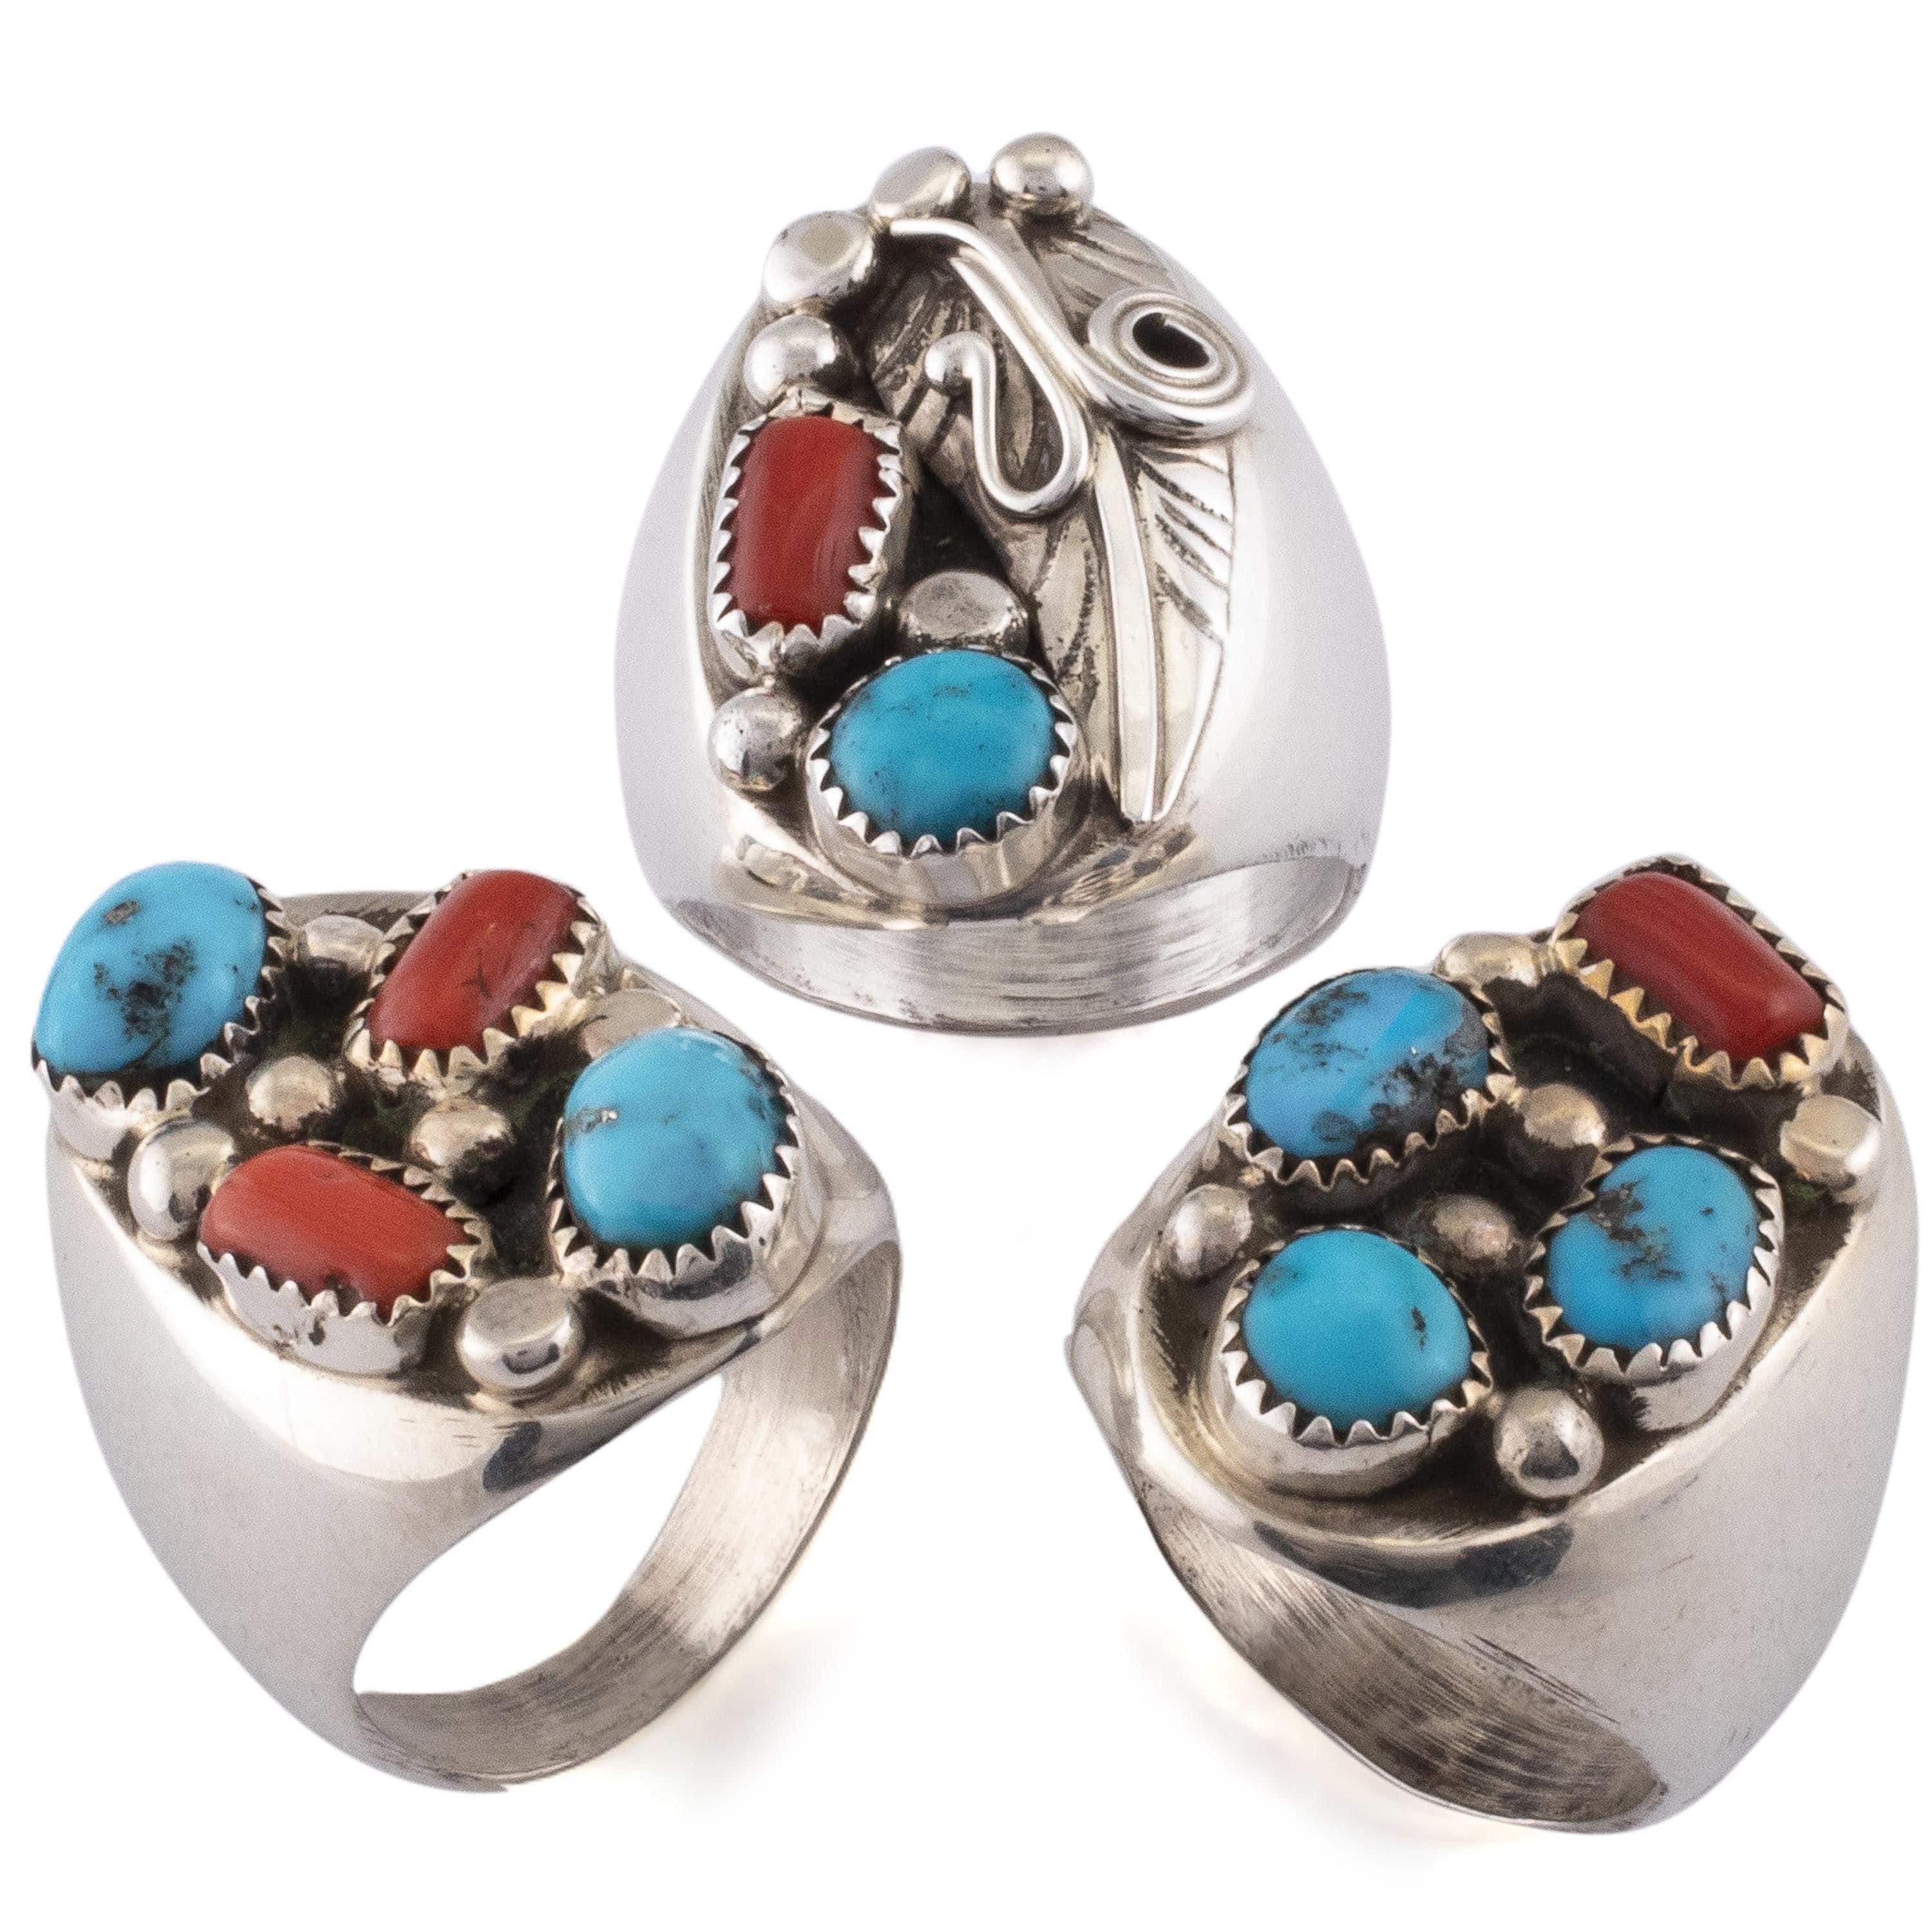 Kalifano Native American Jewelry 10.5 Sleeping Beauty Turquoise and Coral USA Native American Made 925 Sterling Silver Ring NAR1000.022.105